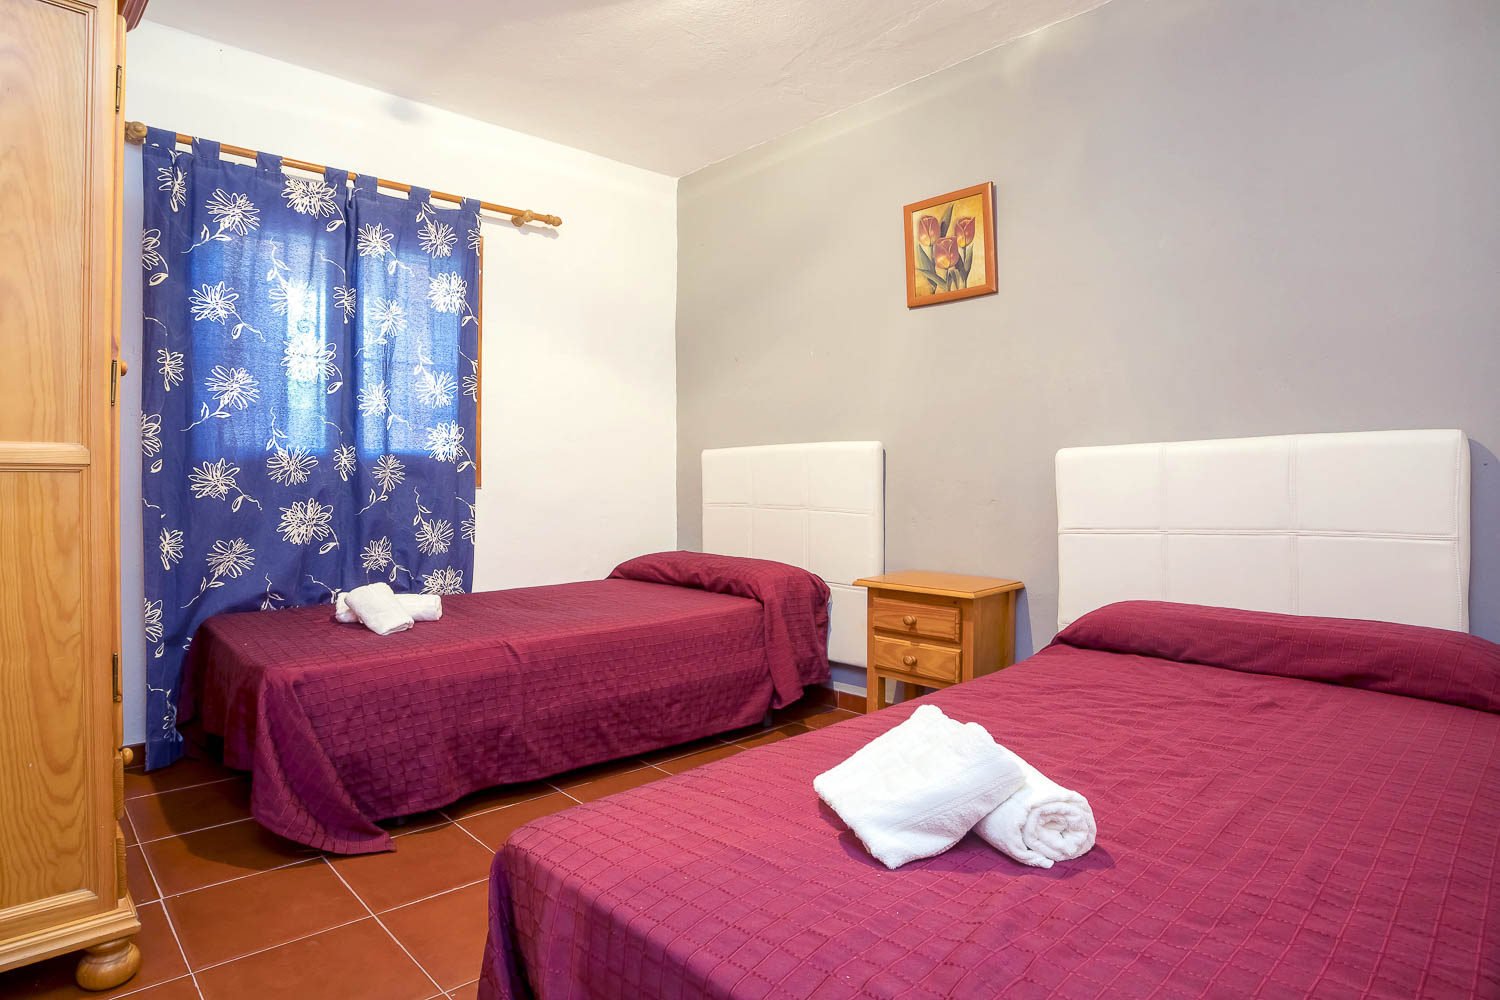 Double and a single bed in a room of a rental house in Ibiza